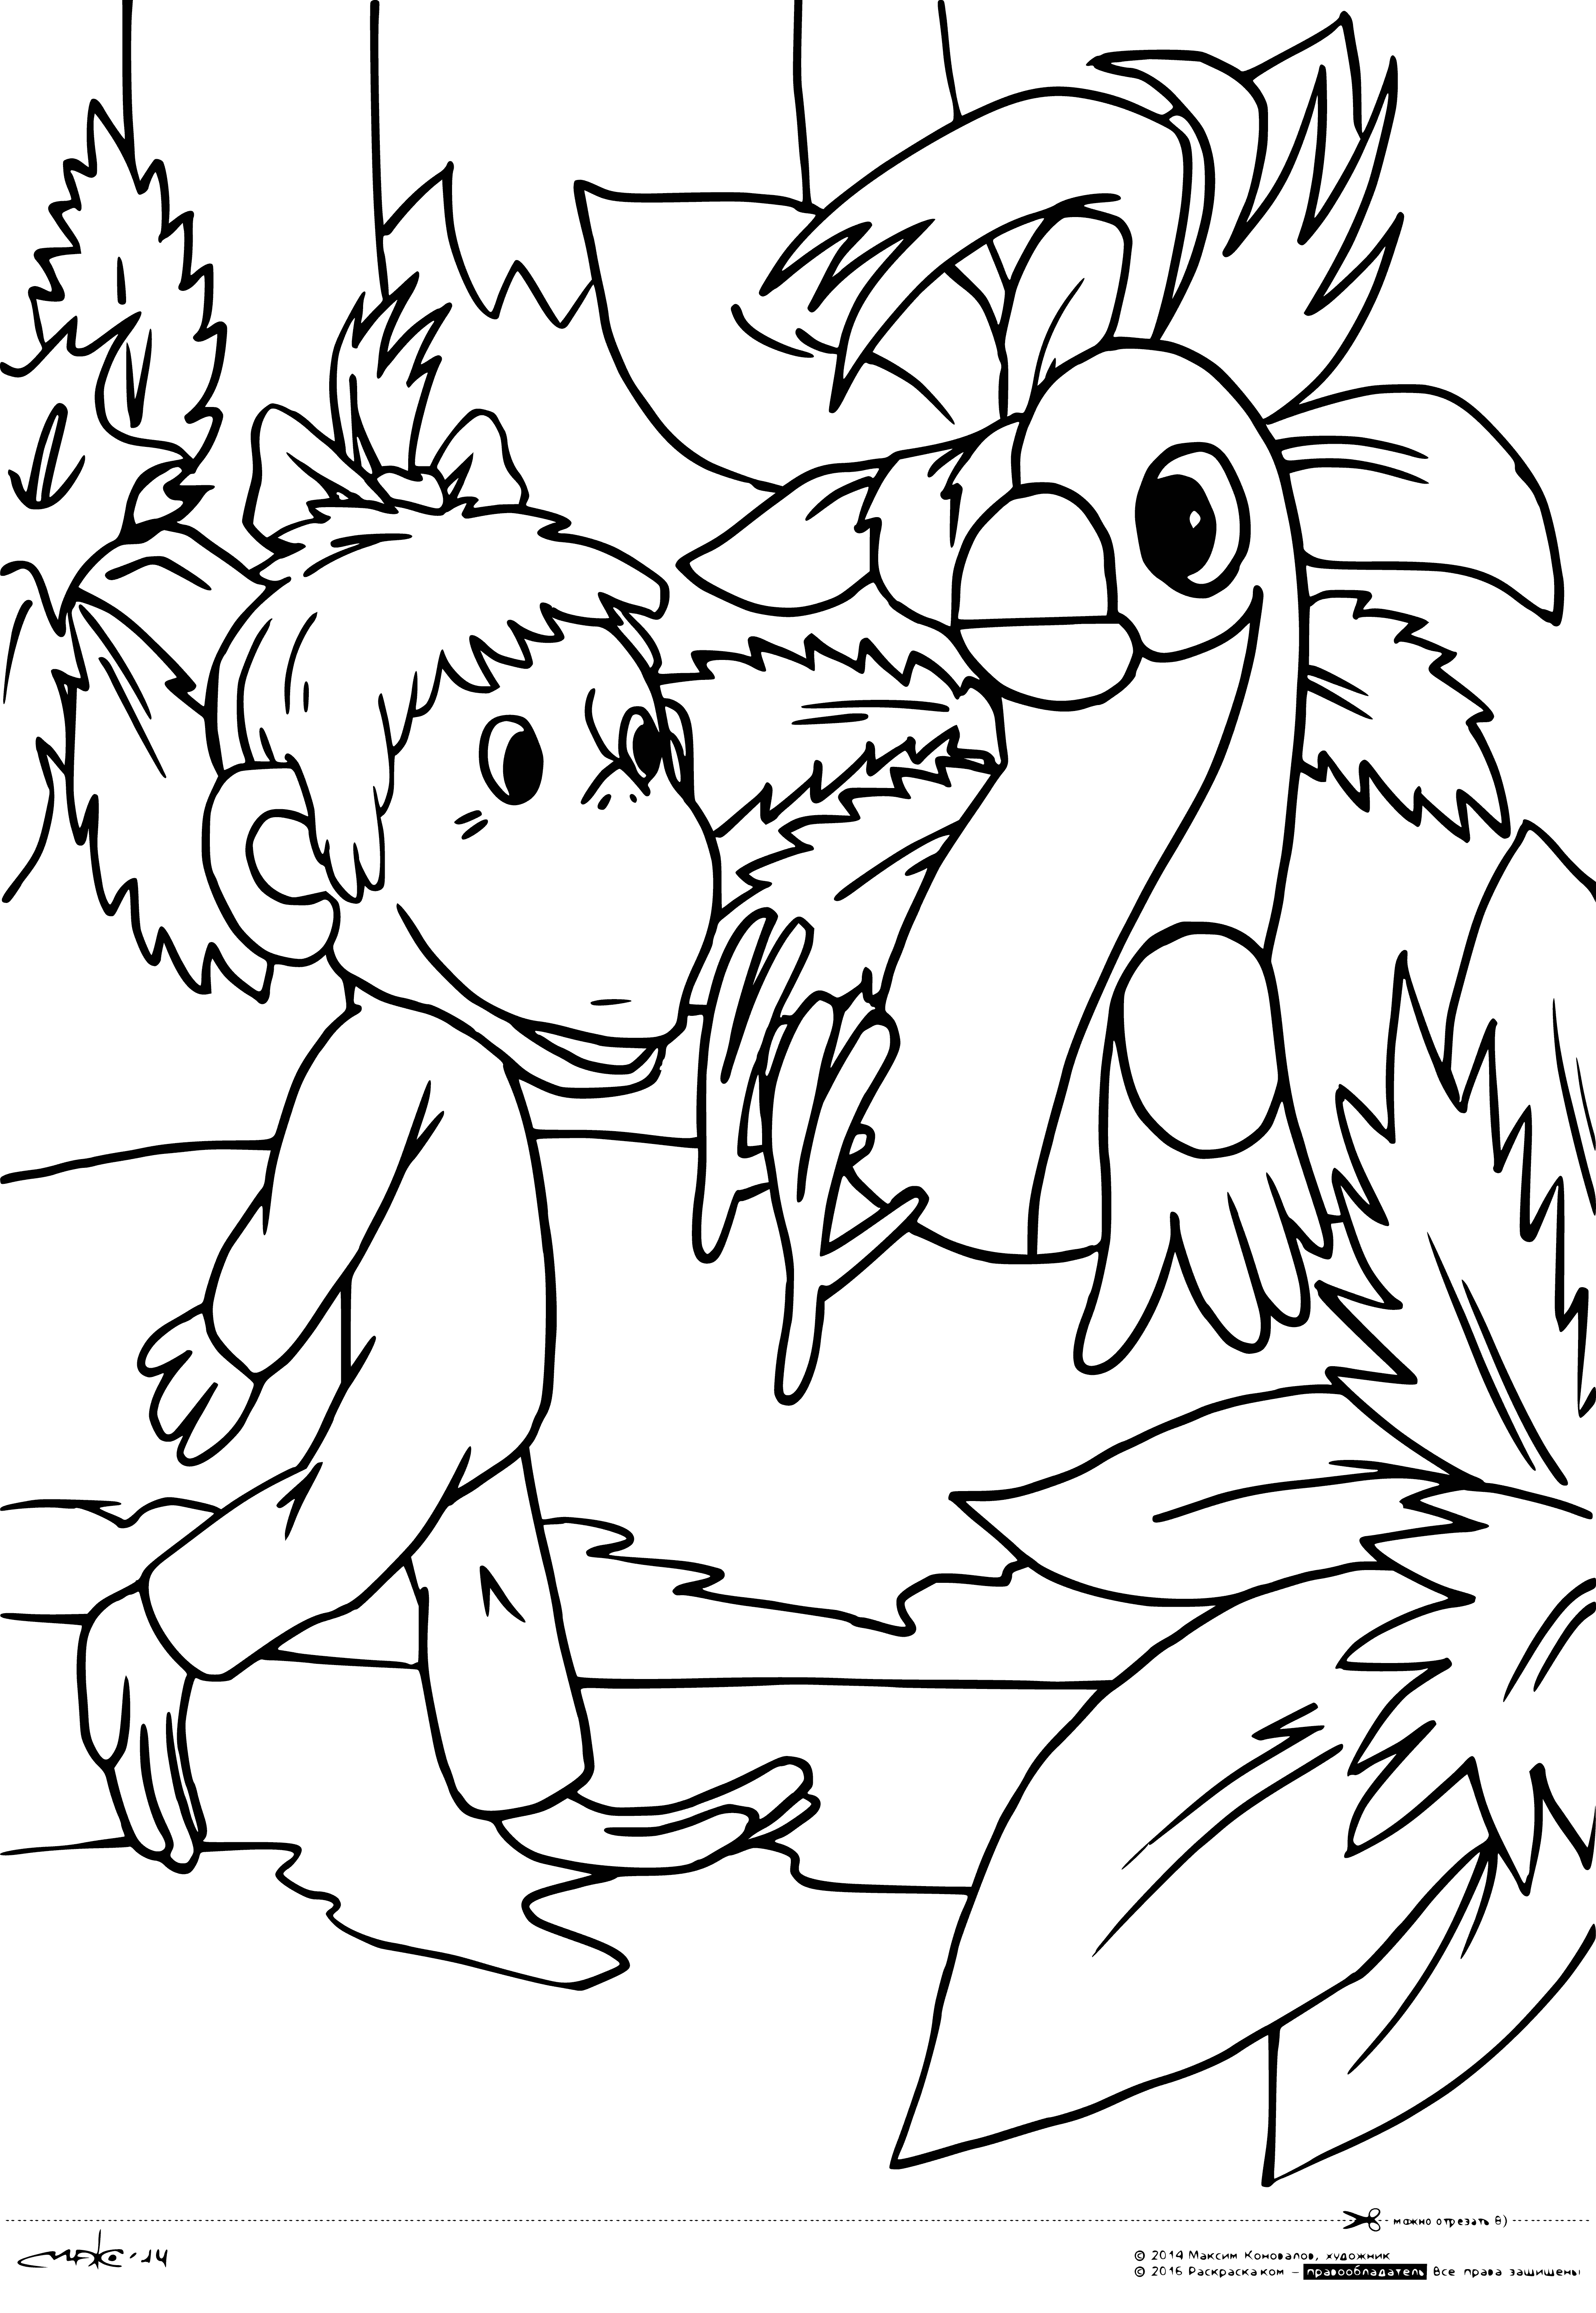 coloring page: 12 blue, 8 yellow, 6 green & 12 red parrots. One blue parrot perched on back of brown monkey w/ light brown face.